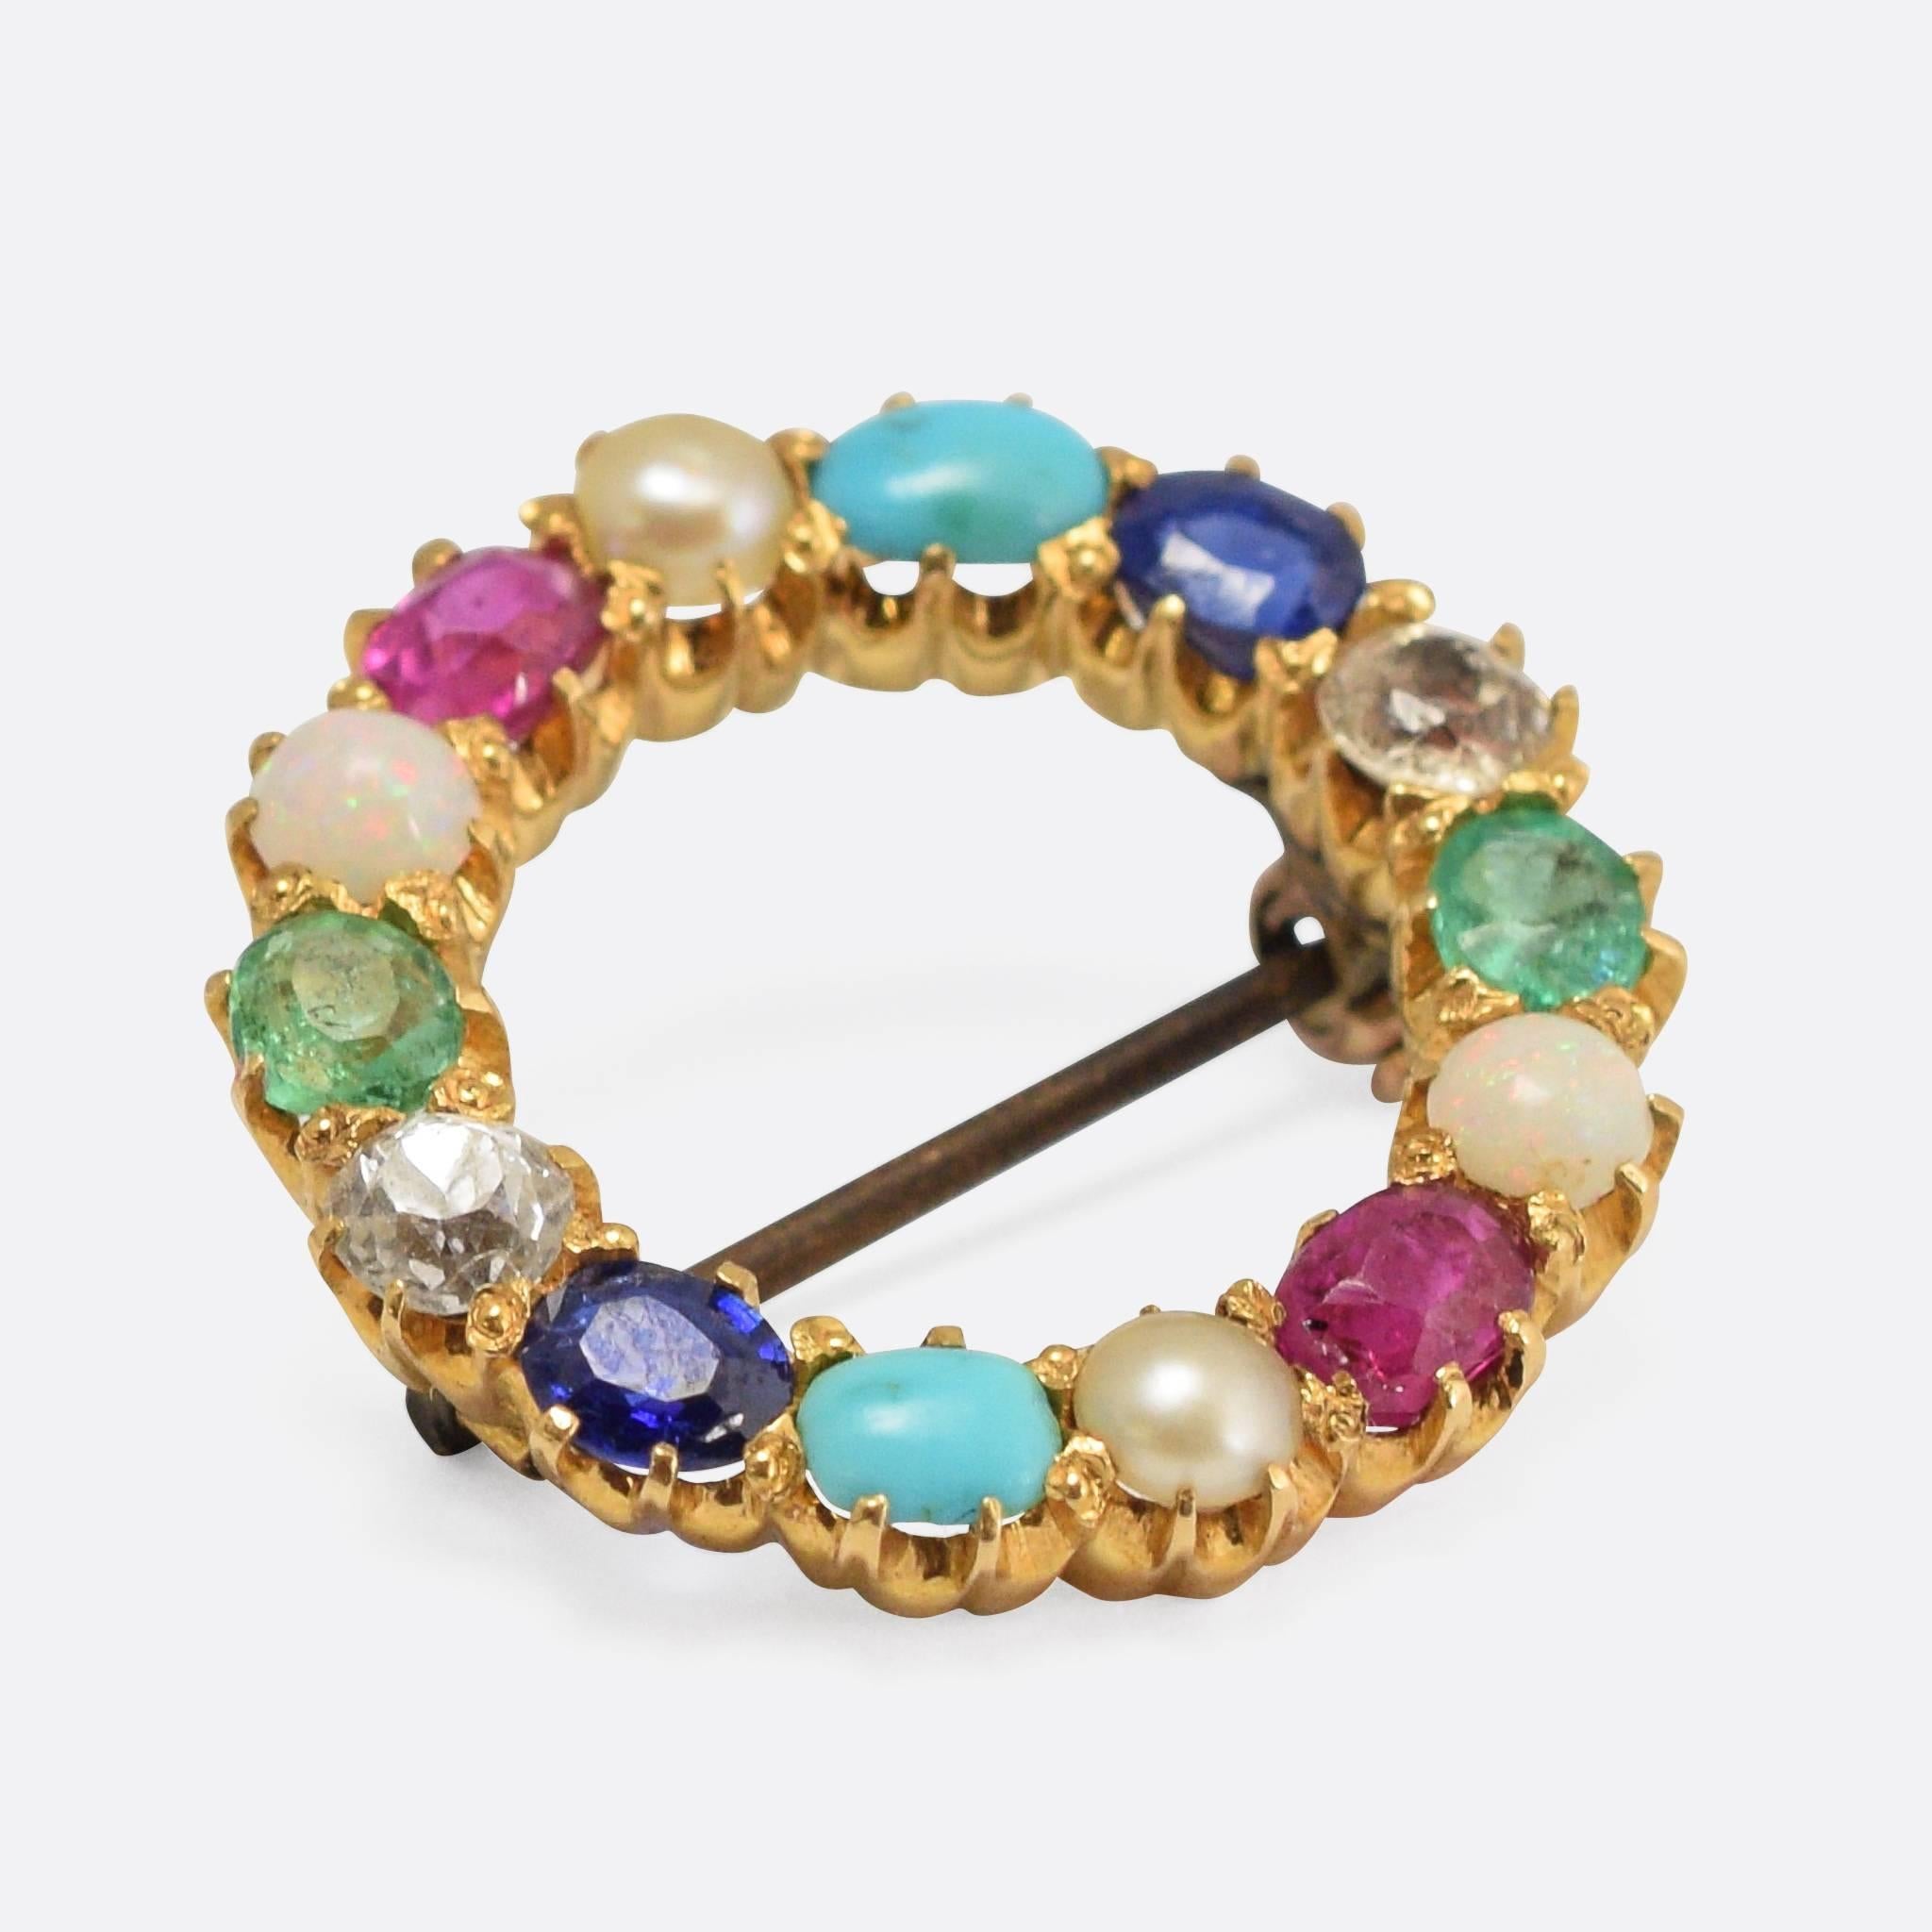 An excellent antique Halo Brooch set with harlequin stones: a combination of pearl, diamond, emerald, turquoise, ruby, sapphire, and opal. Modelled in 15k yellow gold, with the stones resting in stylish scalloped claw mounts. Set with natural pearl,